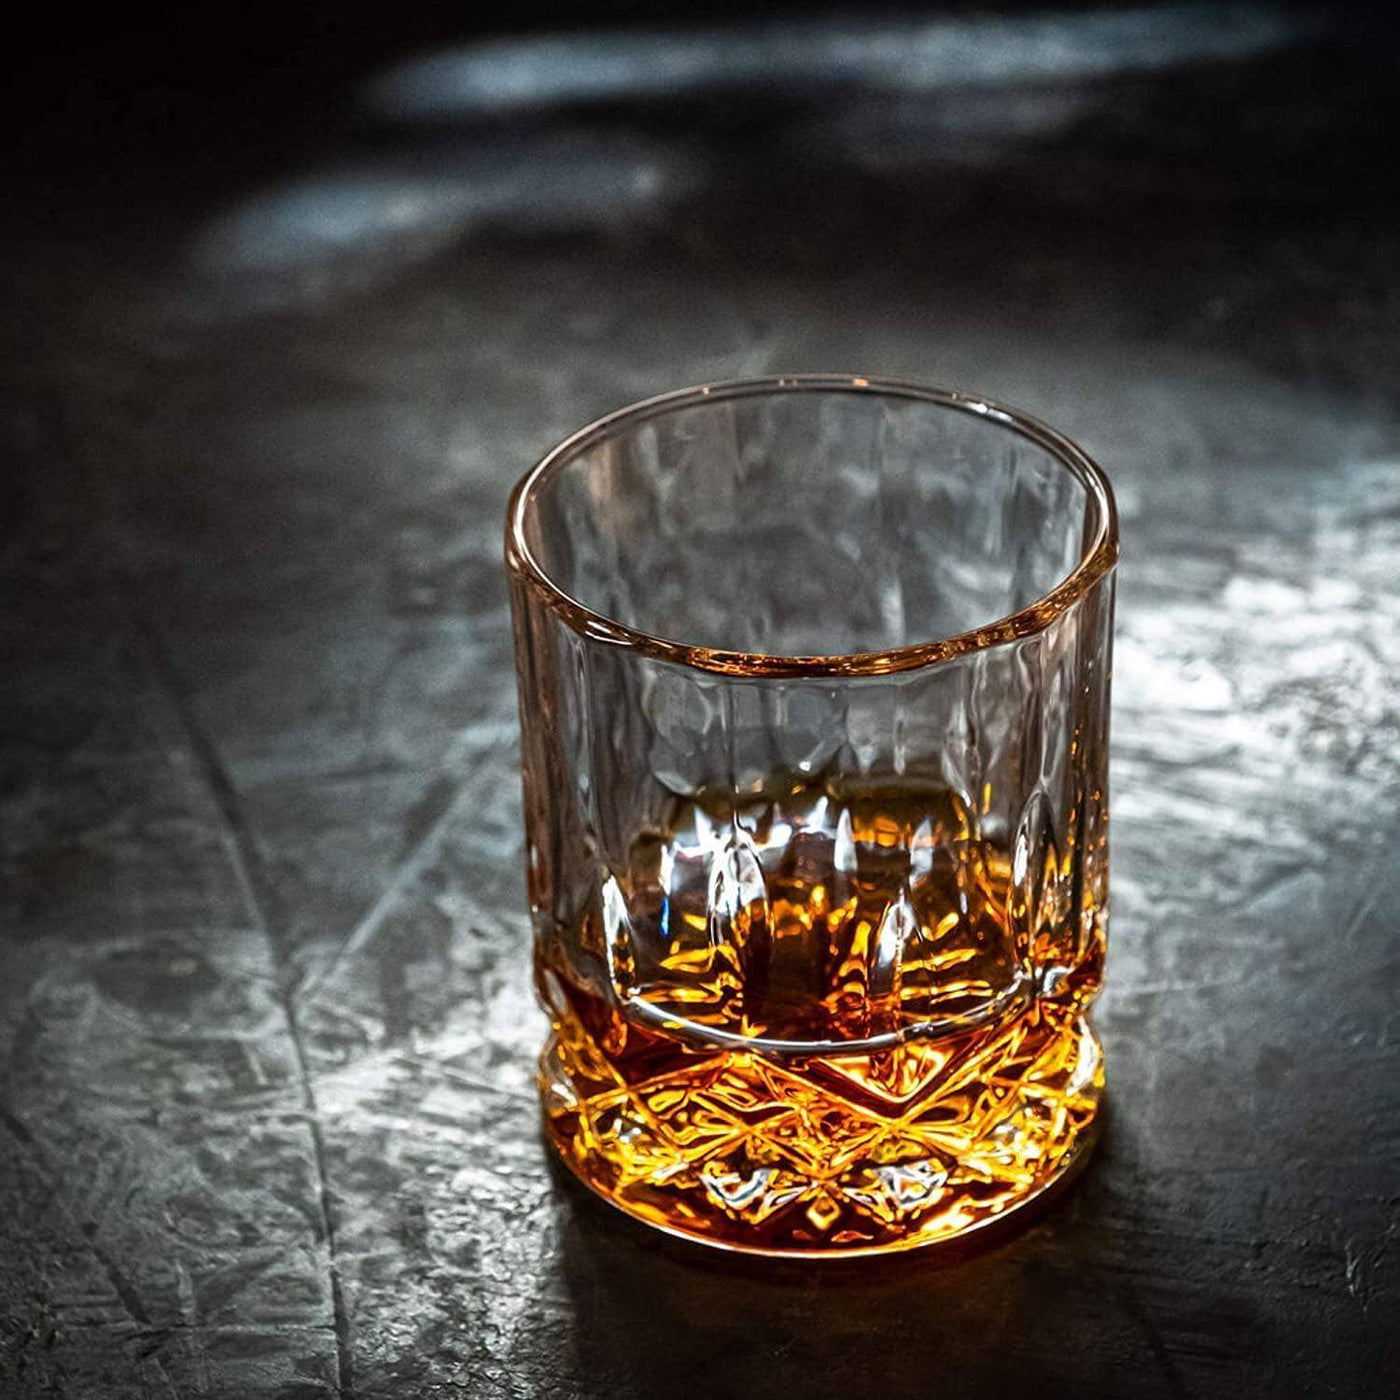 The Connoisseur's Set - Signature Whiskey Glass Edition - TwoBeeps.co.uk